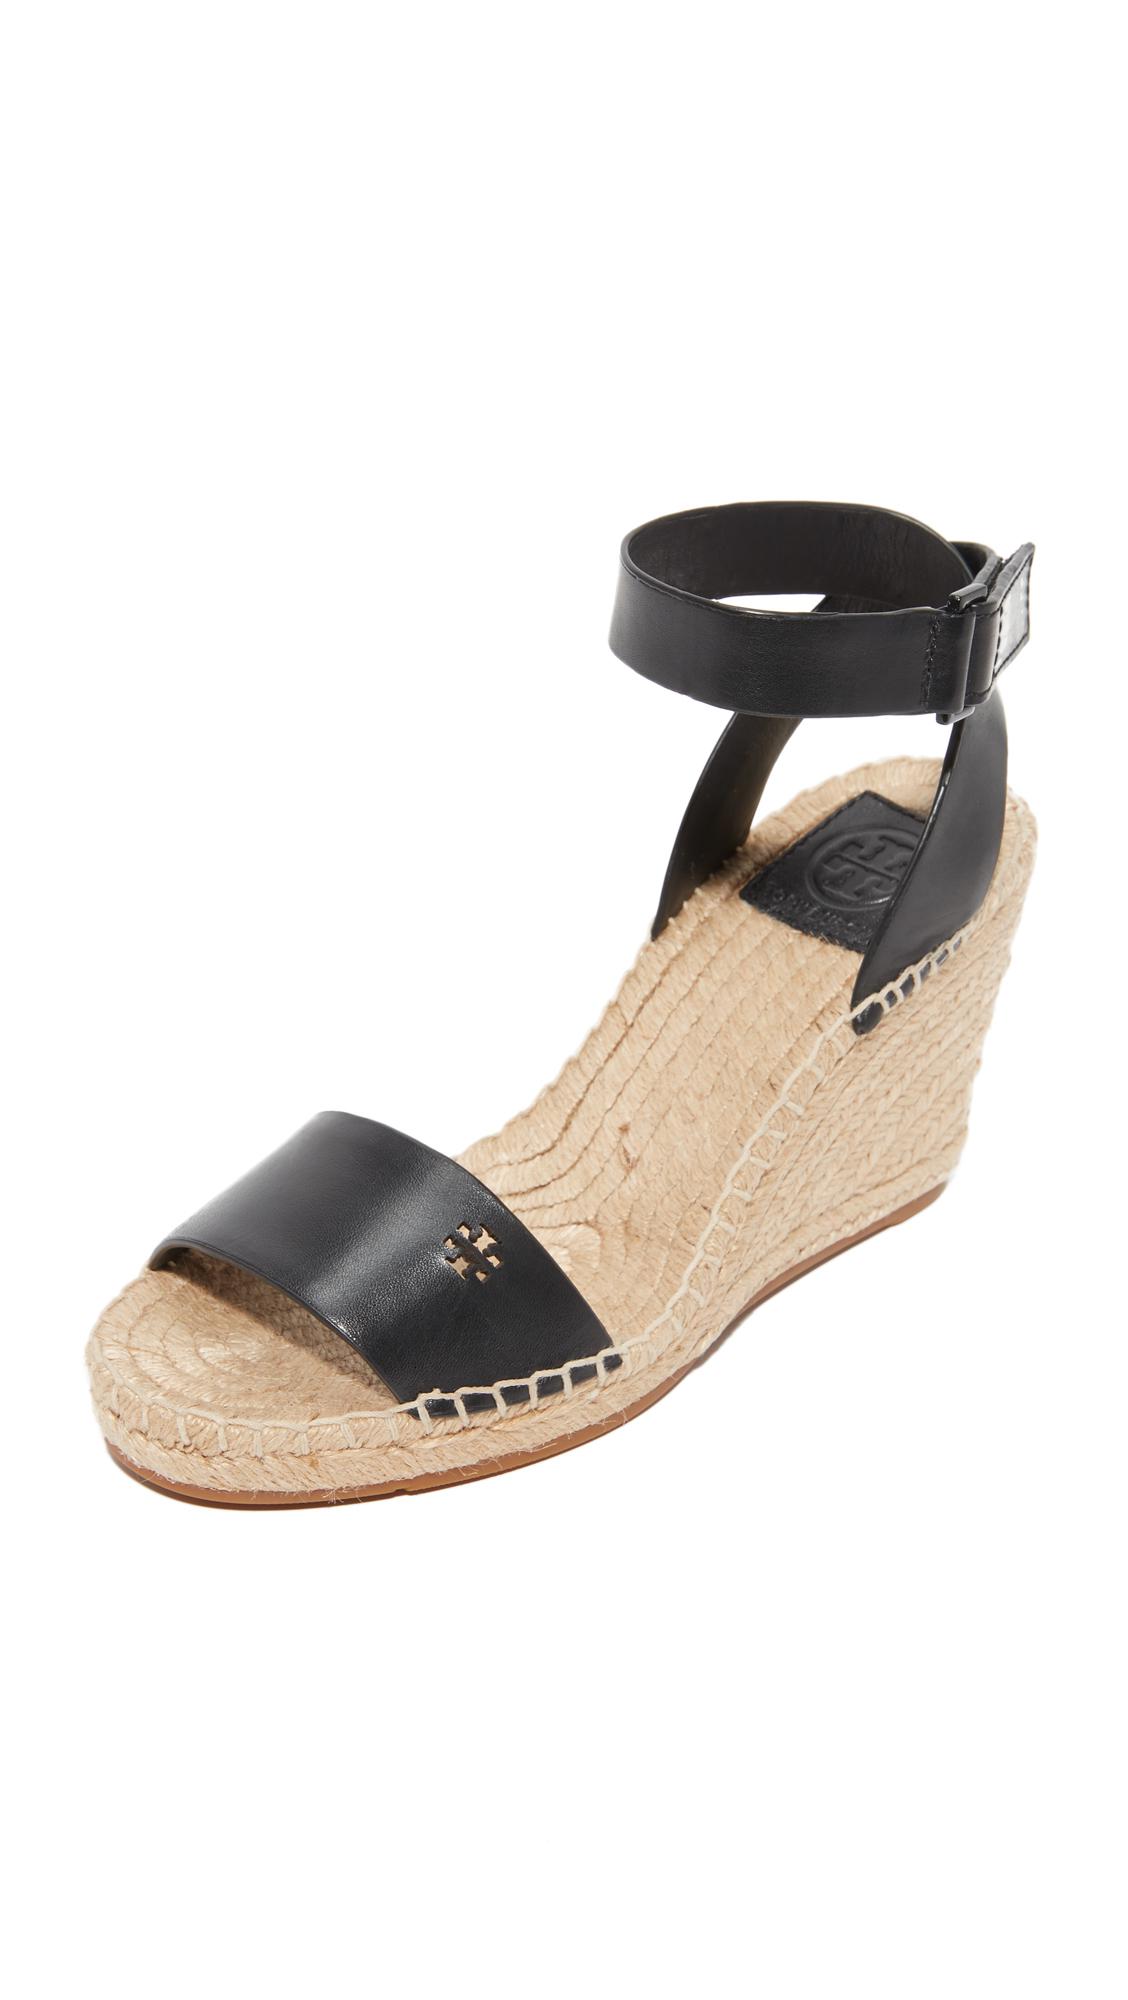 Tory Burch Wedge Espadrilles Clearance Buy, Save 54% 